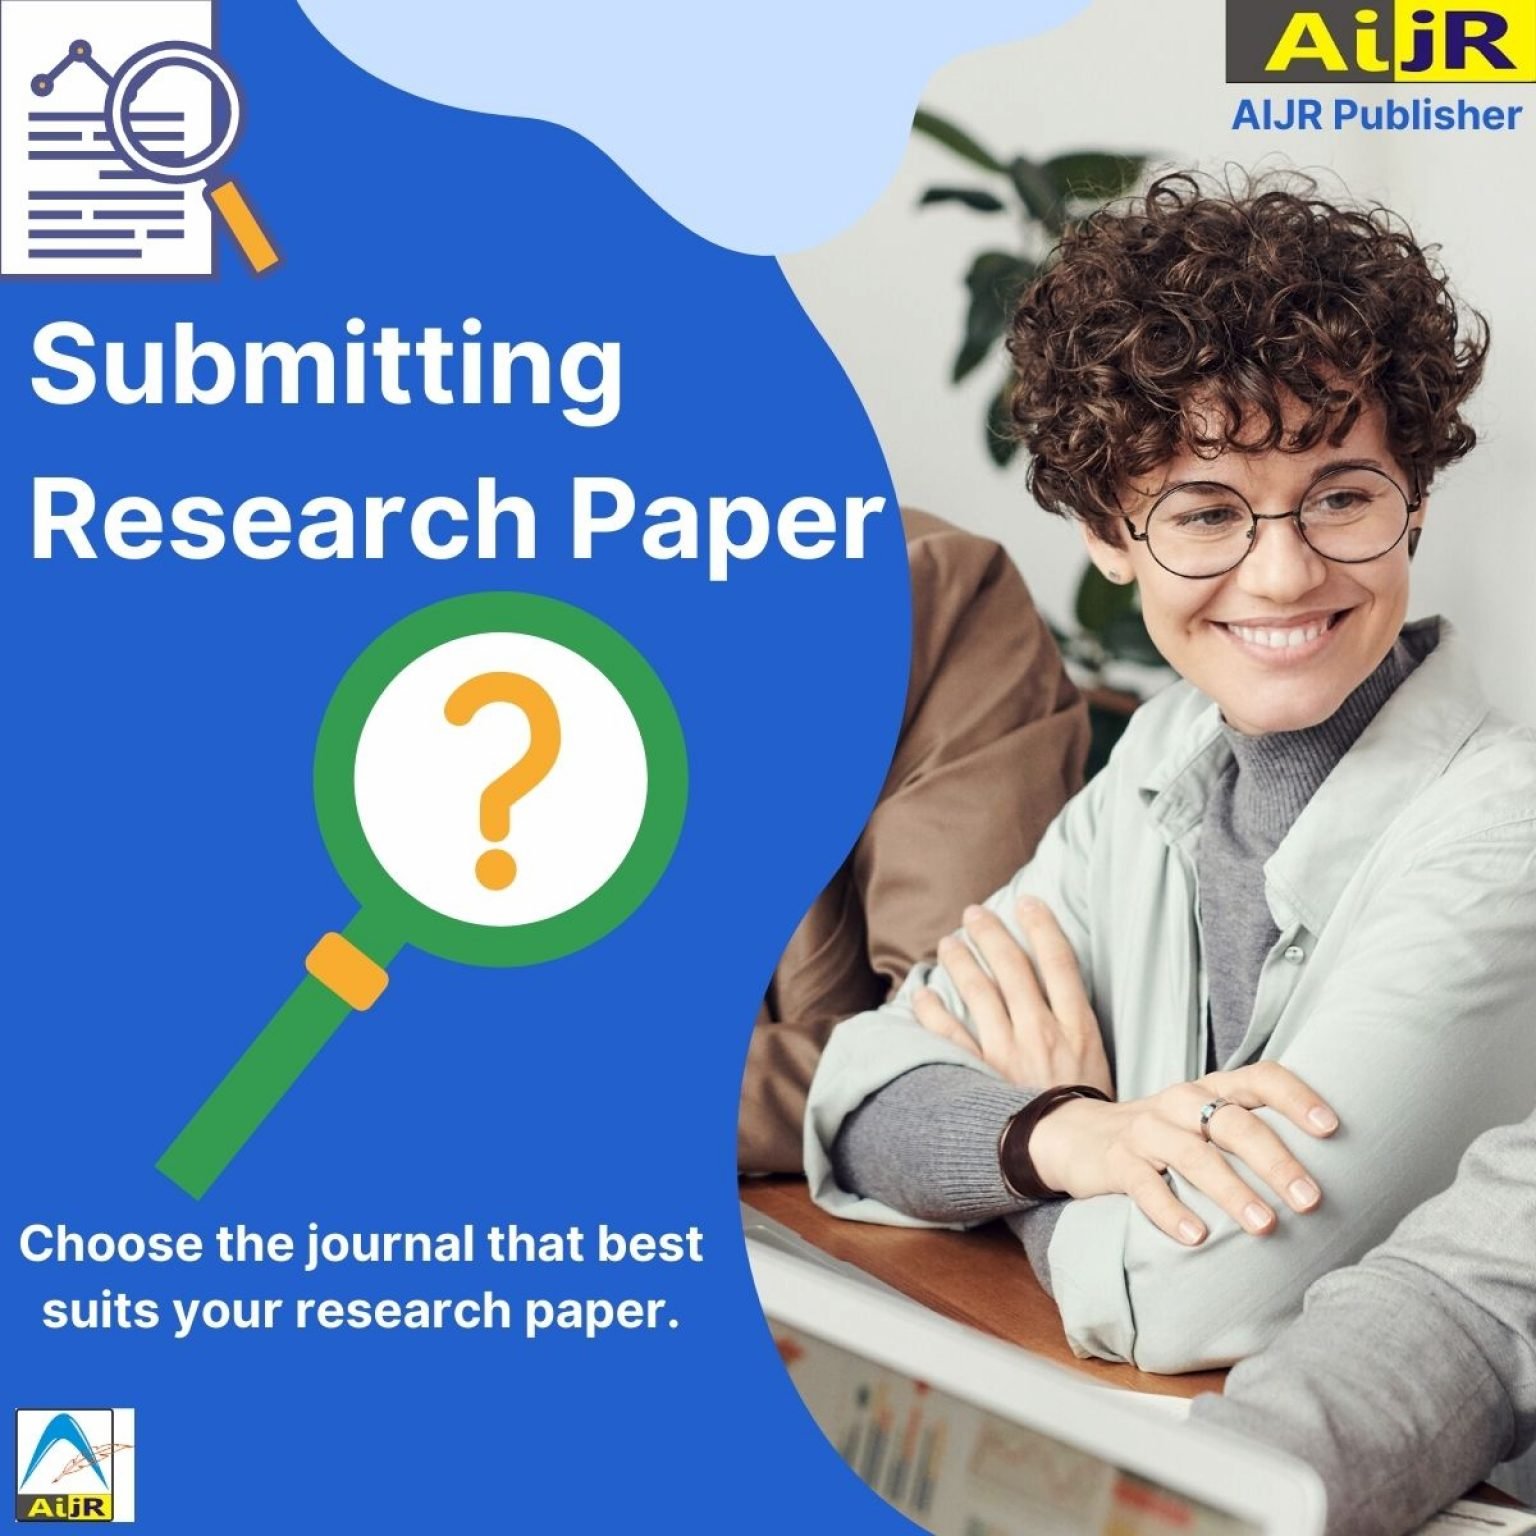 procedure to submit research paper